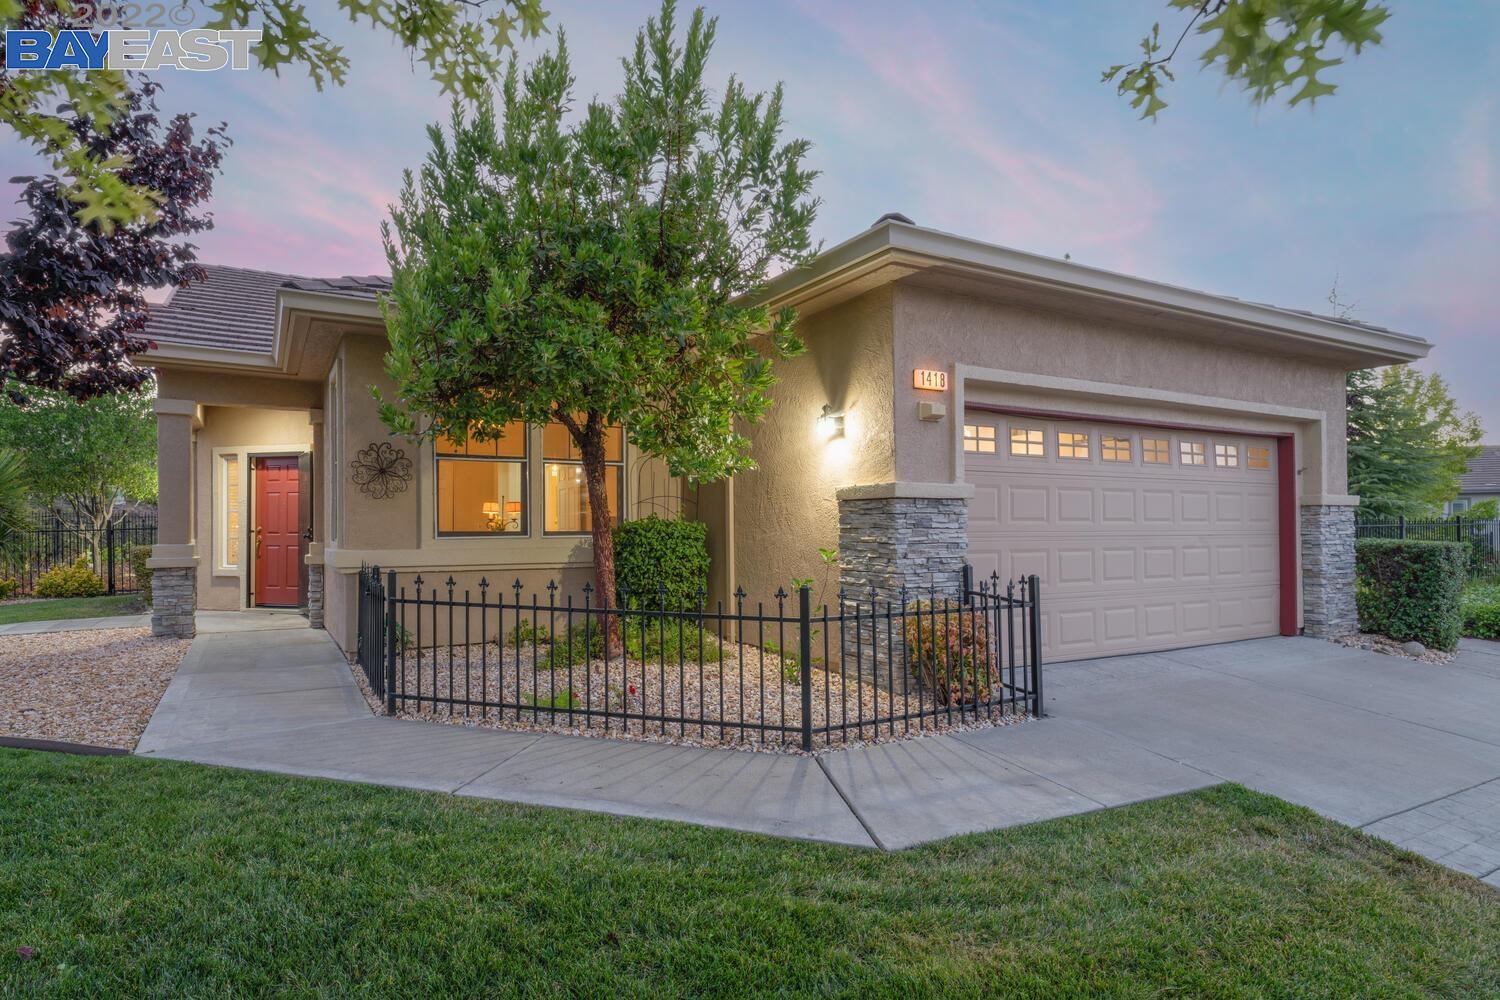 OPEN SATURDAY. Welcome to 1418 Bismarck Ln. in the desirable Summerset 3, gated 55+ active adult community. This lovely Cortland model home is steel framed and features one of the largest lots in Summerset. Private and fully fenced, the surprisingly low maintenance 16,500+ sf yard features many shade trees, a lovely garden area, and private, extended, covered patio with a roll down shade. The freshly painted interior enhances the bright and sunny kitchen with white cabinets, corian countertops, walk-in pantry, breakfast bar, less than one year old refrigerator, and newer dishwasher, gas range, and microwave within the last 5 years. The flexible floor plan takes advantage of the builder’s option for a smart space in lieu of the typical indoor laundry room. A large primary suite hosts a walk-in closet, primary bath with stall shower and privacy glass and dual sink vanity. Visit the Summerset 3 community to see the many amenities it has to offer and… Welcome Home.